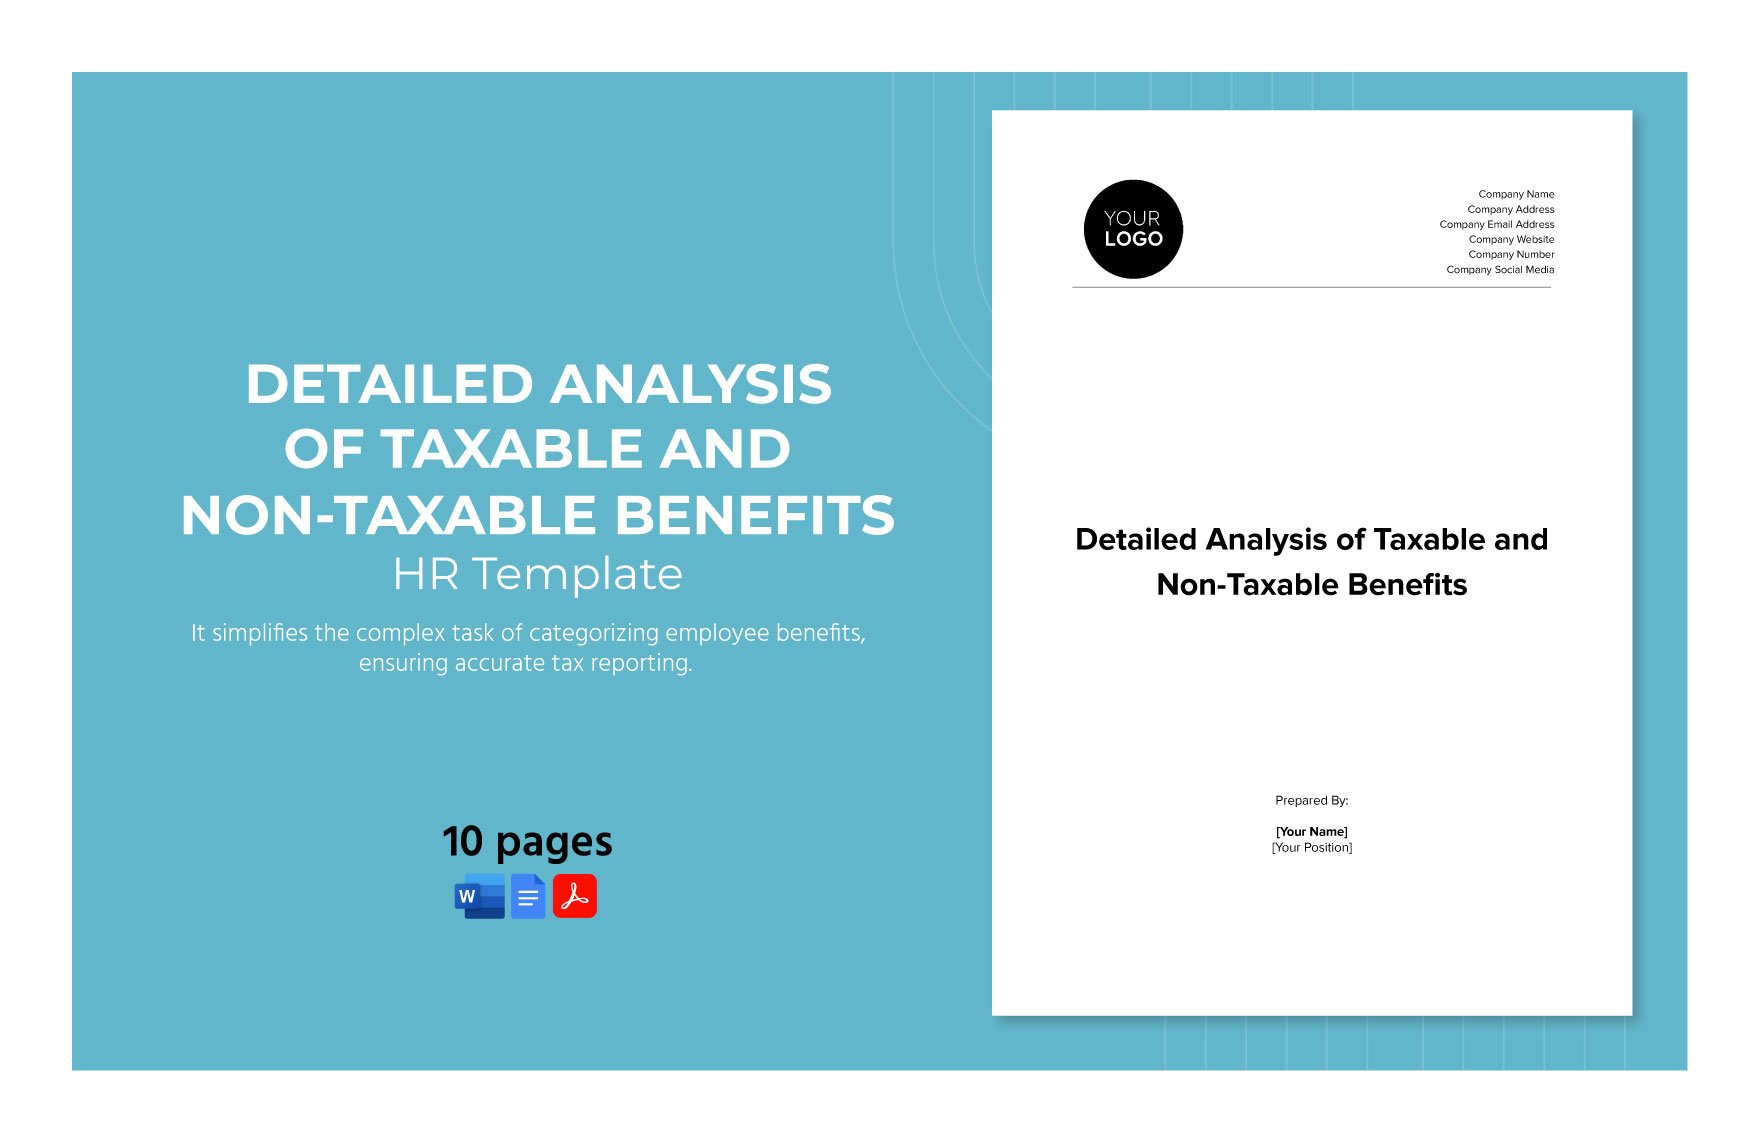 Detailed Analysis of Taxable and Non-Taxable Benefits HR Template